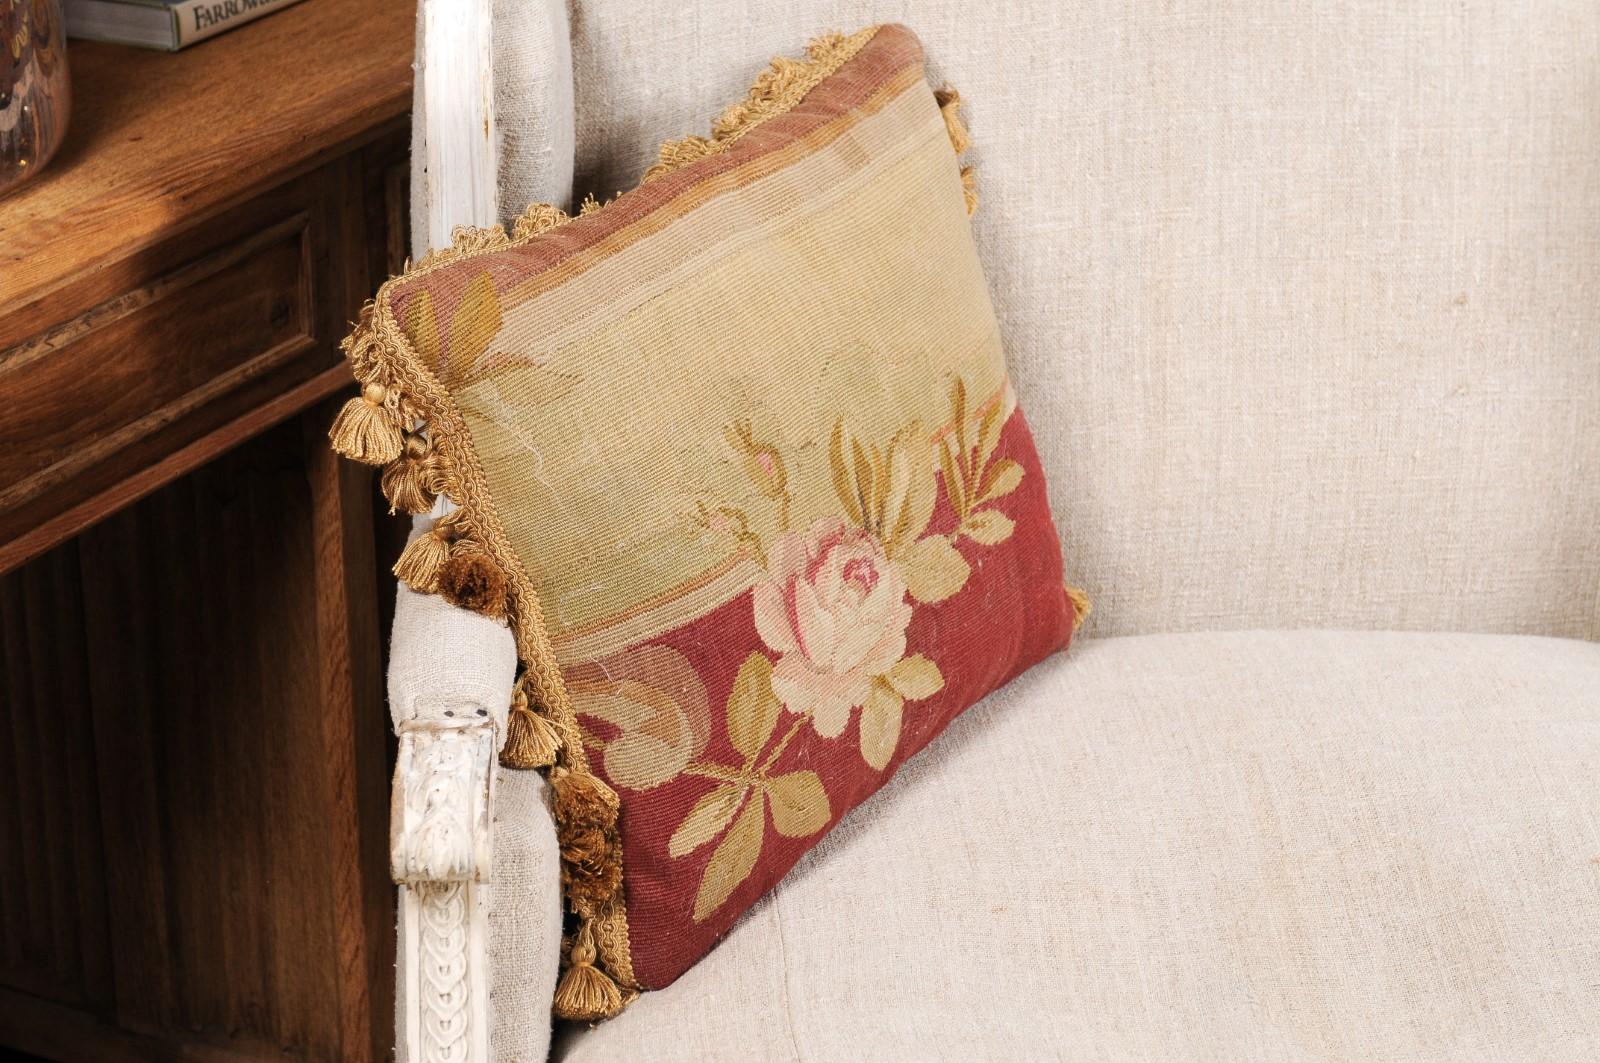 French 19th Century Aubusson Tapestry Pillow with Rose, Foliage and Tassels For Sale 2